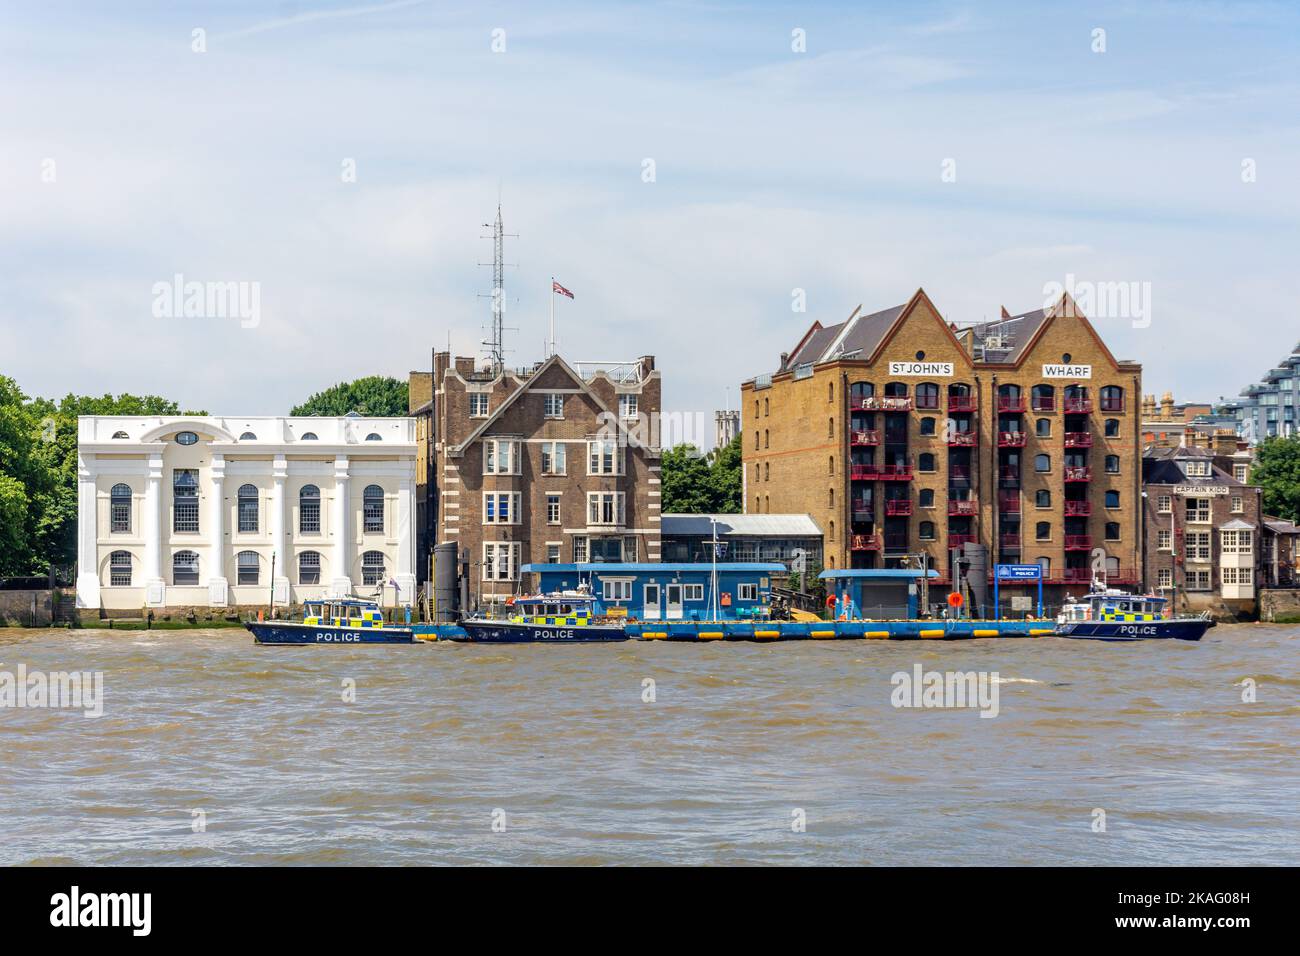 Metropolitan police Marine police Unit on River Thames, Wapping, The London Borough of Tower Hamlets, Greater London, Angleterre, Royaume-Uni Banque D'Images